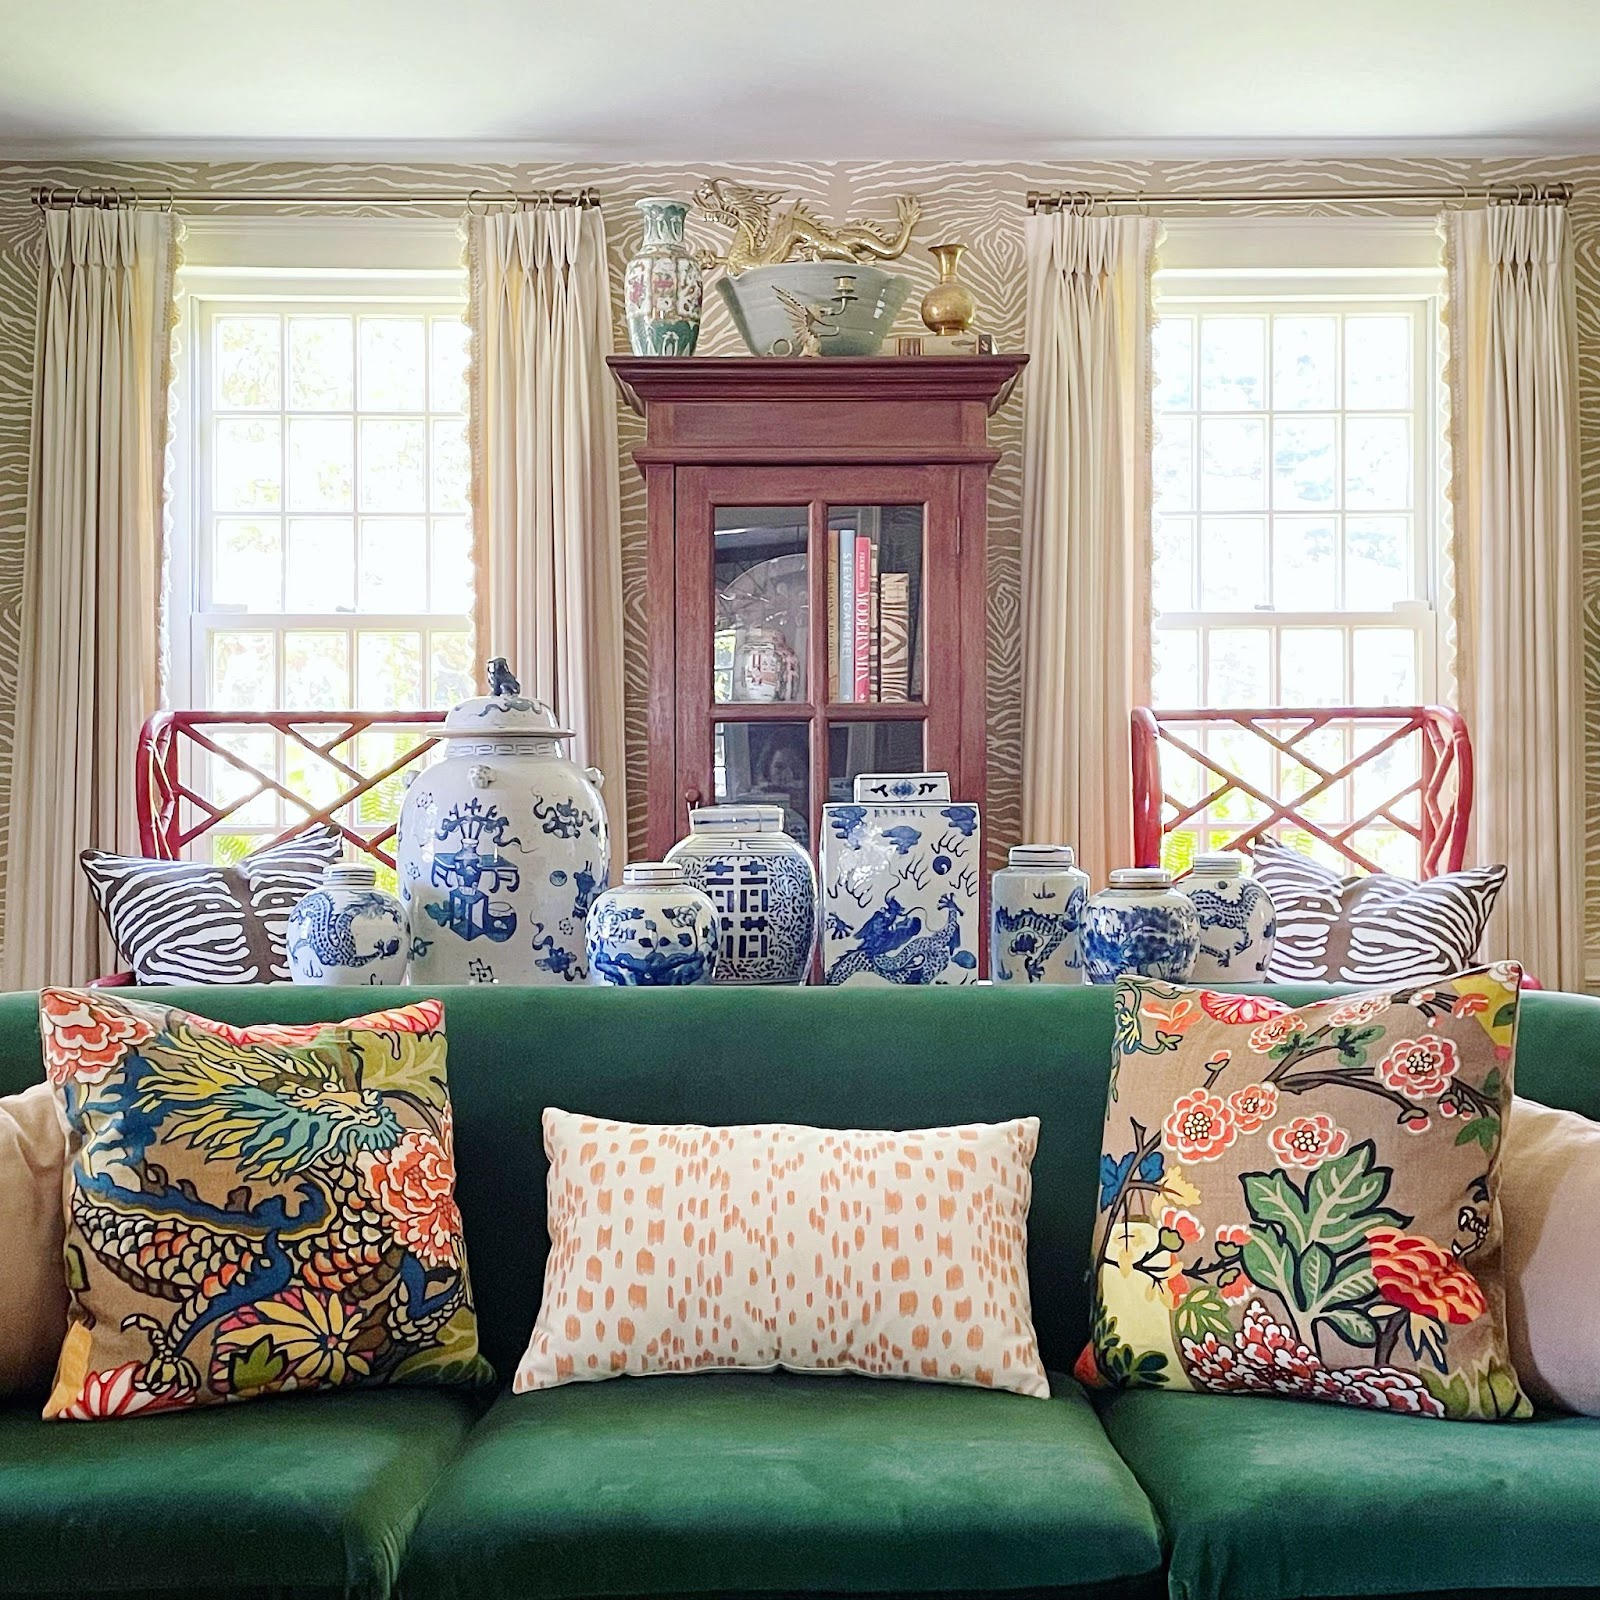 As you enter the living room, you are immediately drawn to the beautiful chinoiserie chairs placed by the windows. The chairs are exquisitely designed with red color, and unique pattern. A plush green sofa sits in the center of the room, creating a cozy seating area for you to sink into.The two large windows in the room allow plenty of natural light to filter in, creating a warm and inviting atmosphere. The windows are framed by flowing neutral color curtains that complement the blue and white vases displayed on the window sills. The vases are of various sizes and shapes, each unique and adding to the overall elegance of the room.The chinoiserie element is continued with the throw pillows on the sofa, each featuring a different design of flowers and dragon. A tall cabinet sits in the middle of the windows, its dark wood contrasting beautifully with the lightness of the room. The cabinet is adorned with more vases and other decorative items, adding to the room's charm.